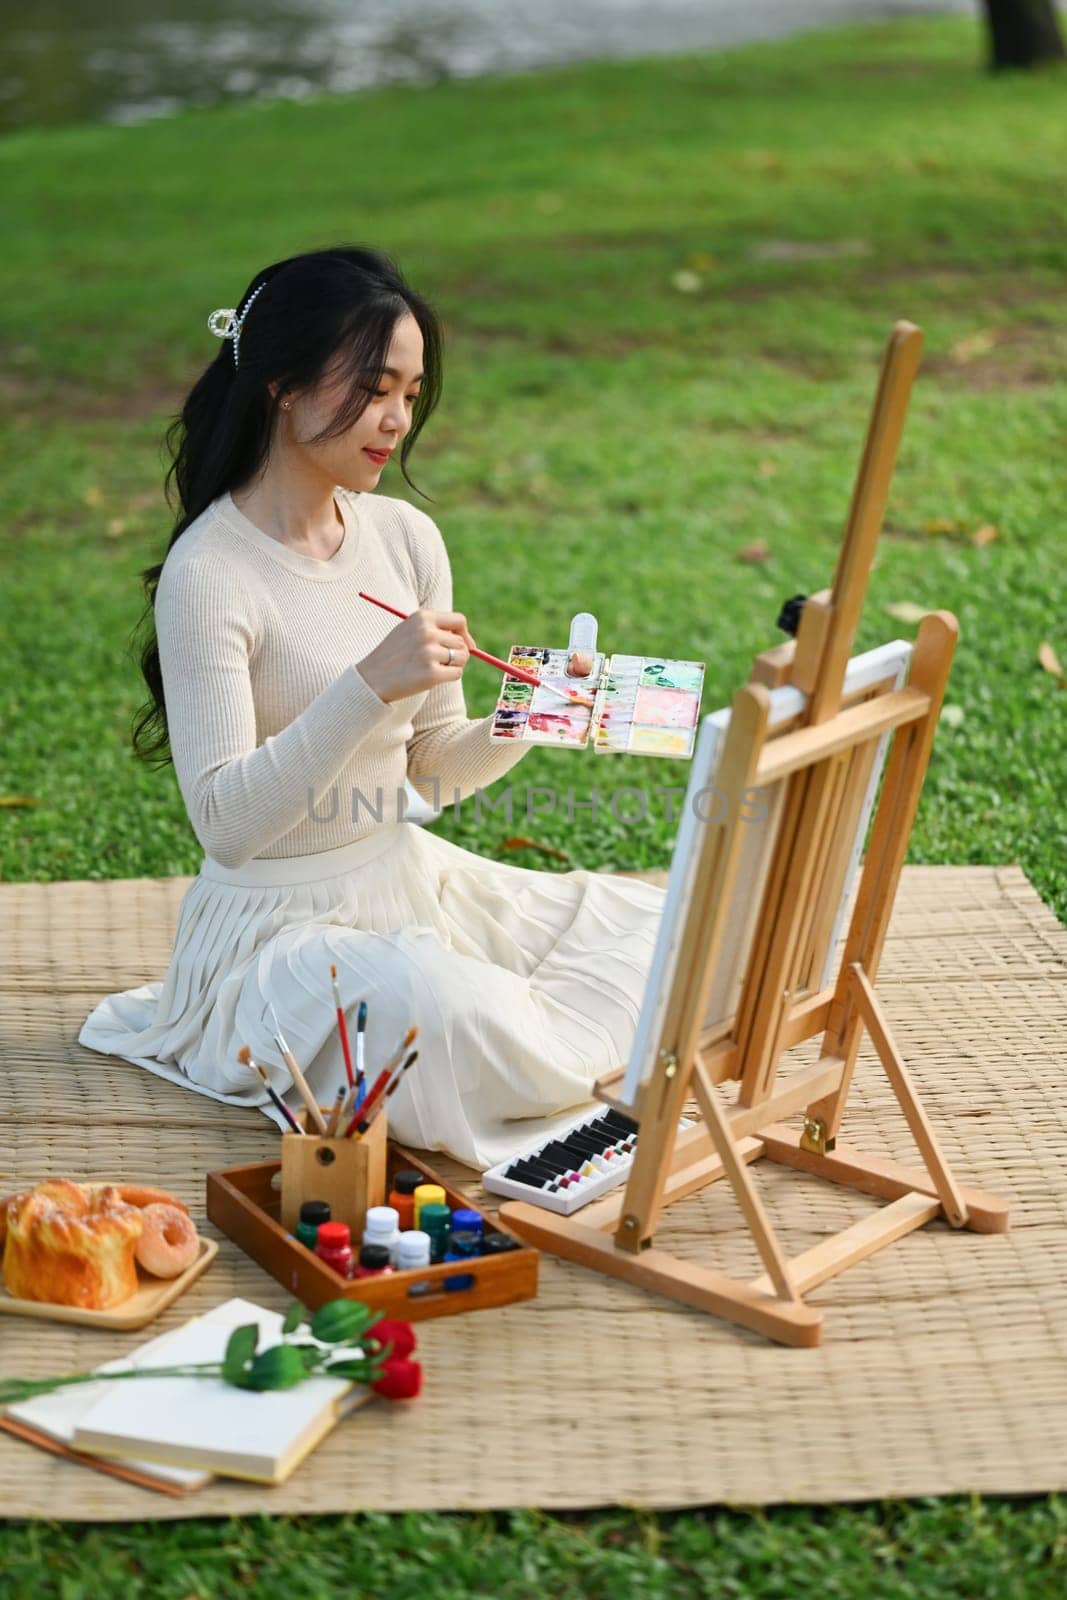 Talented young woman painting on canvas in the park. Art and leisure activity concept by prathanchorruangsak